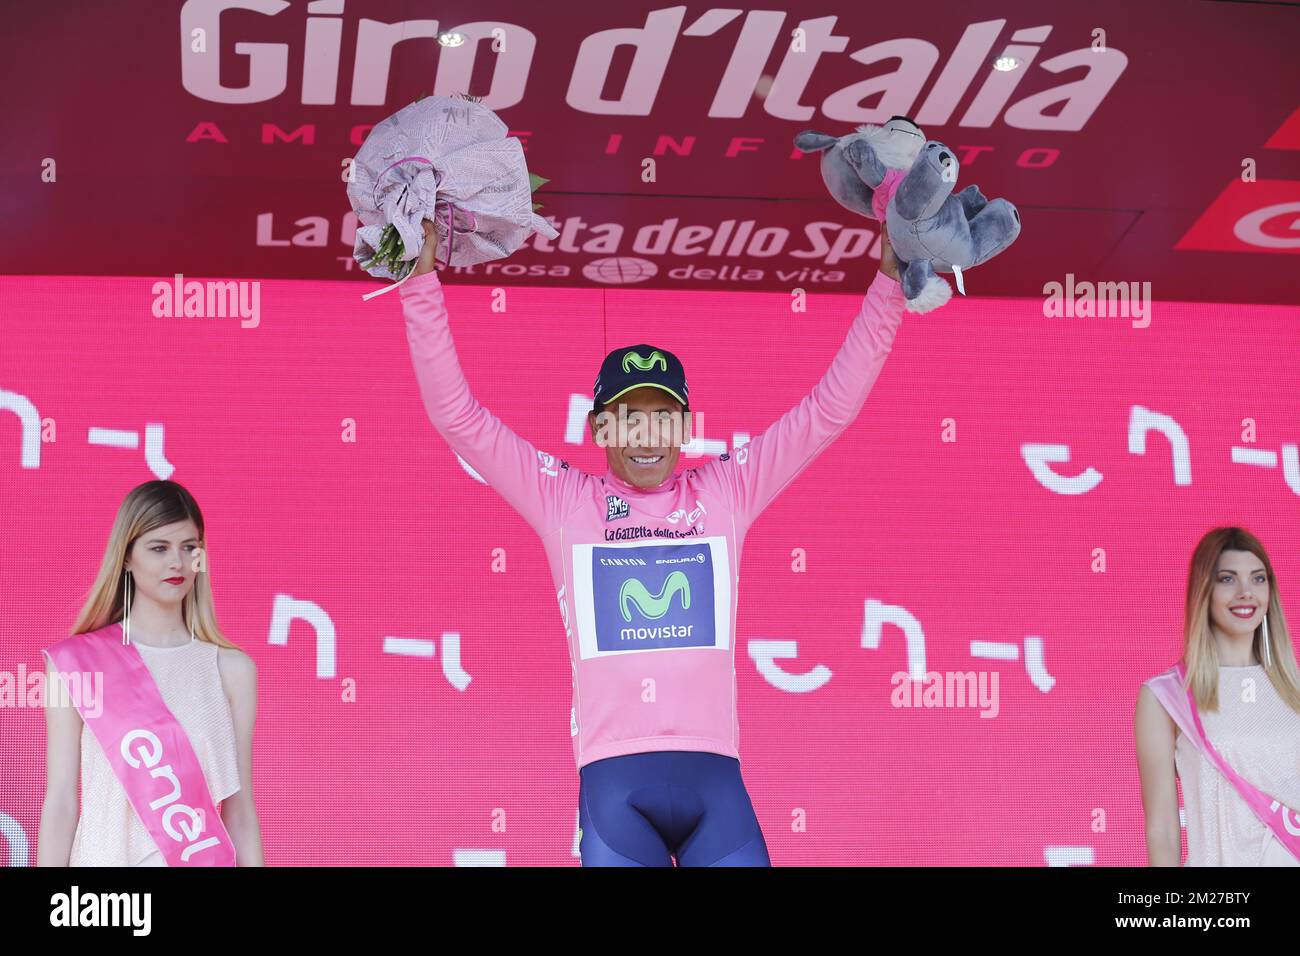 Colombian Nairo Quintana of Movistar Team celebrates on the podium after the nineteenth stage of the Giro 2017 cycling tour, 191 km from San Candido/Innichen to Piancavallo, Italy, Friday 26 May 2017. BELGA PHOTO YUZURU SUNADA  Stock Photo